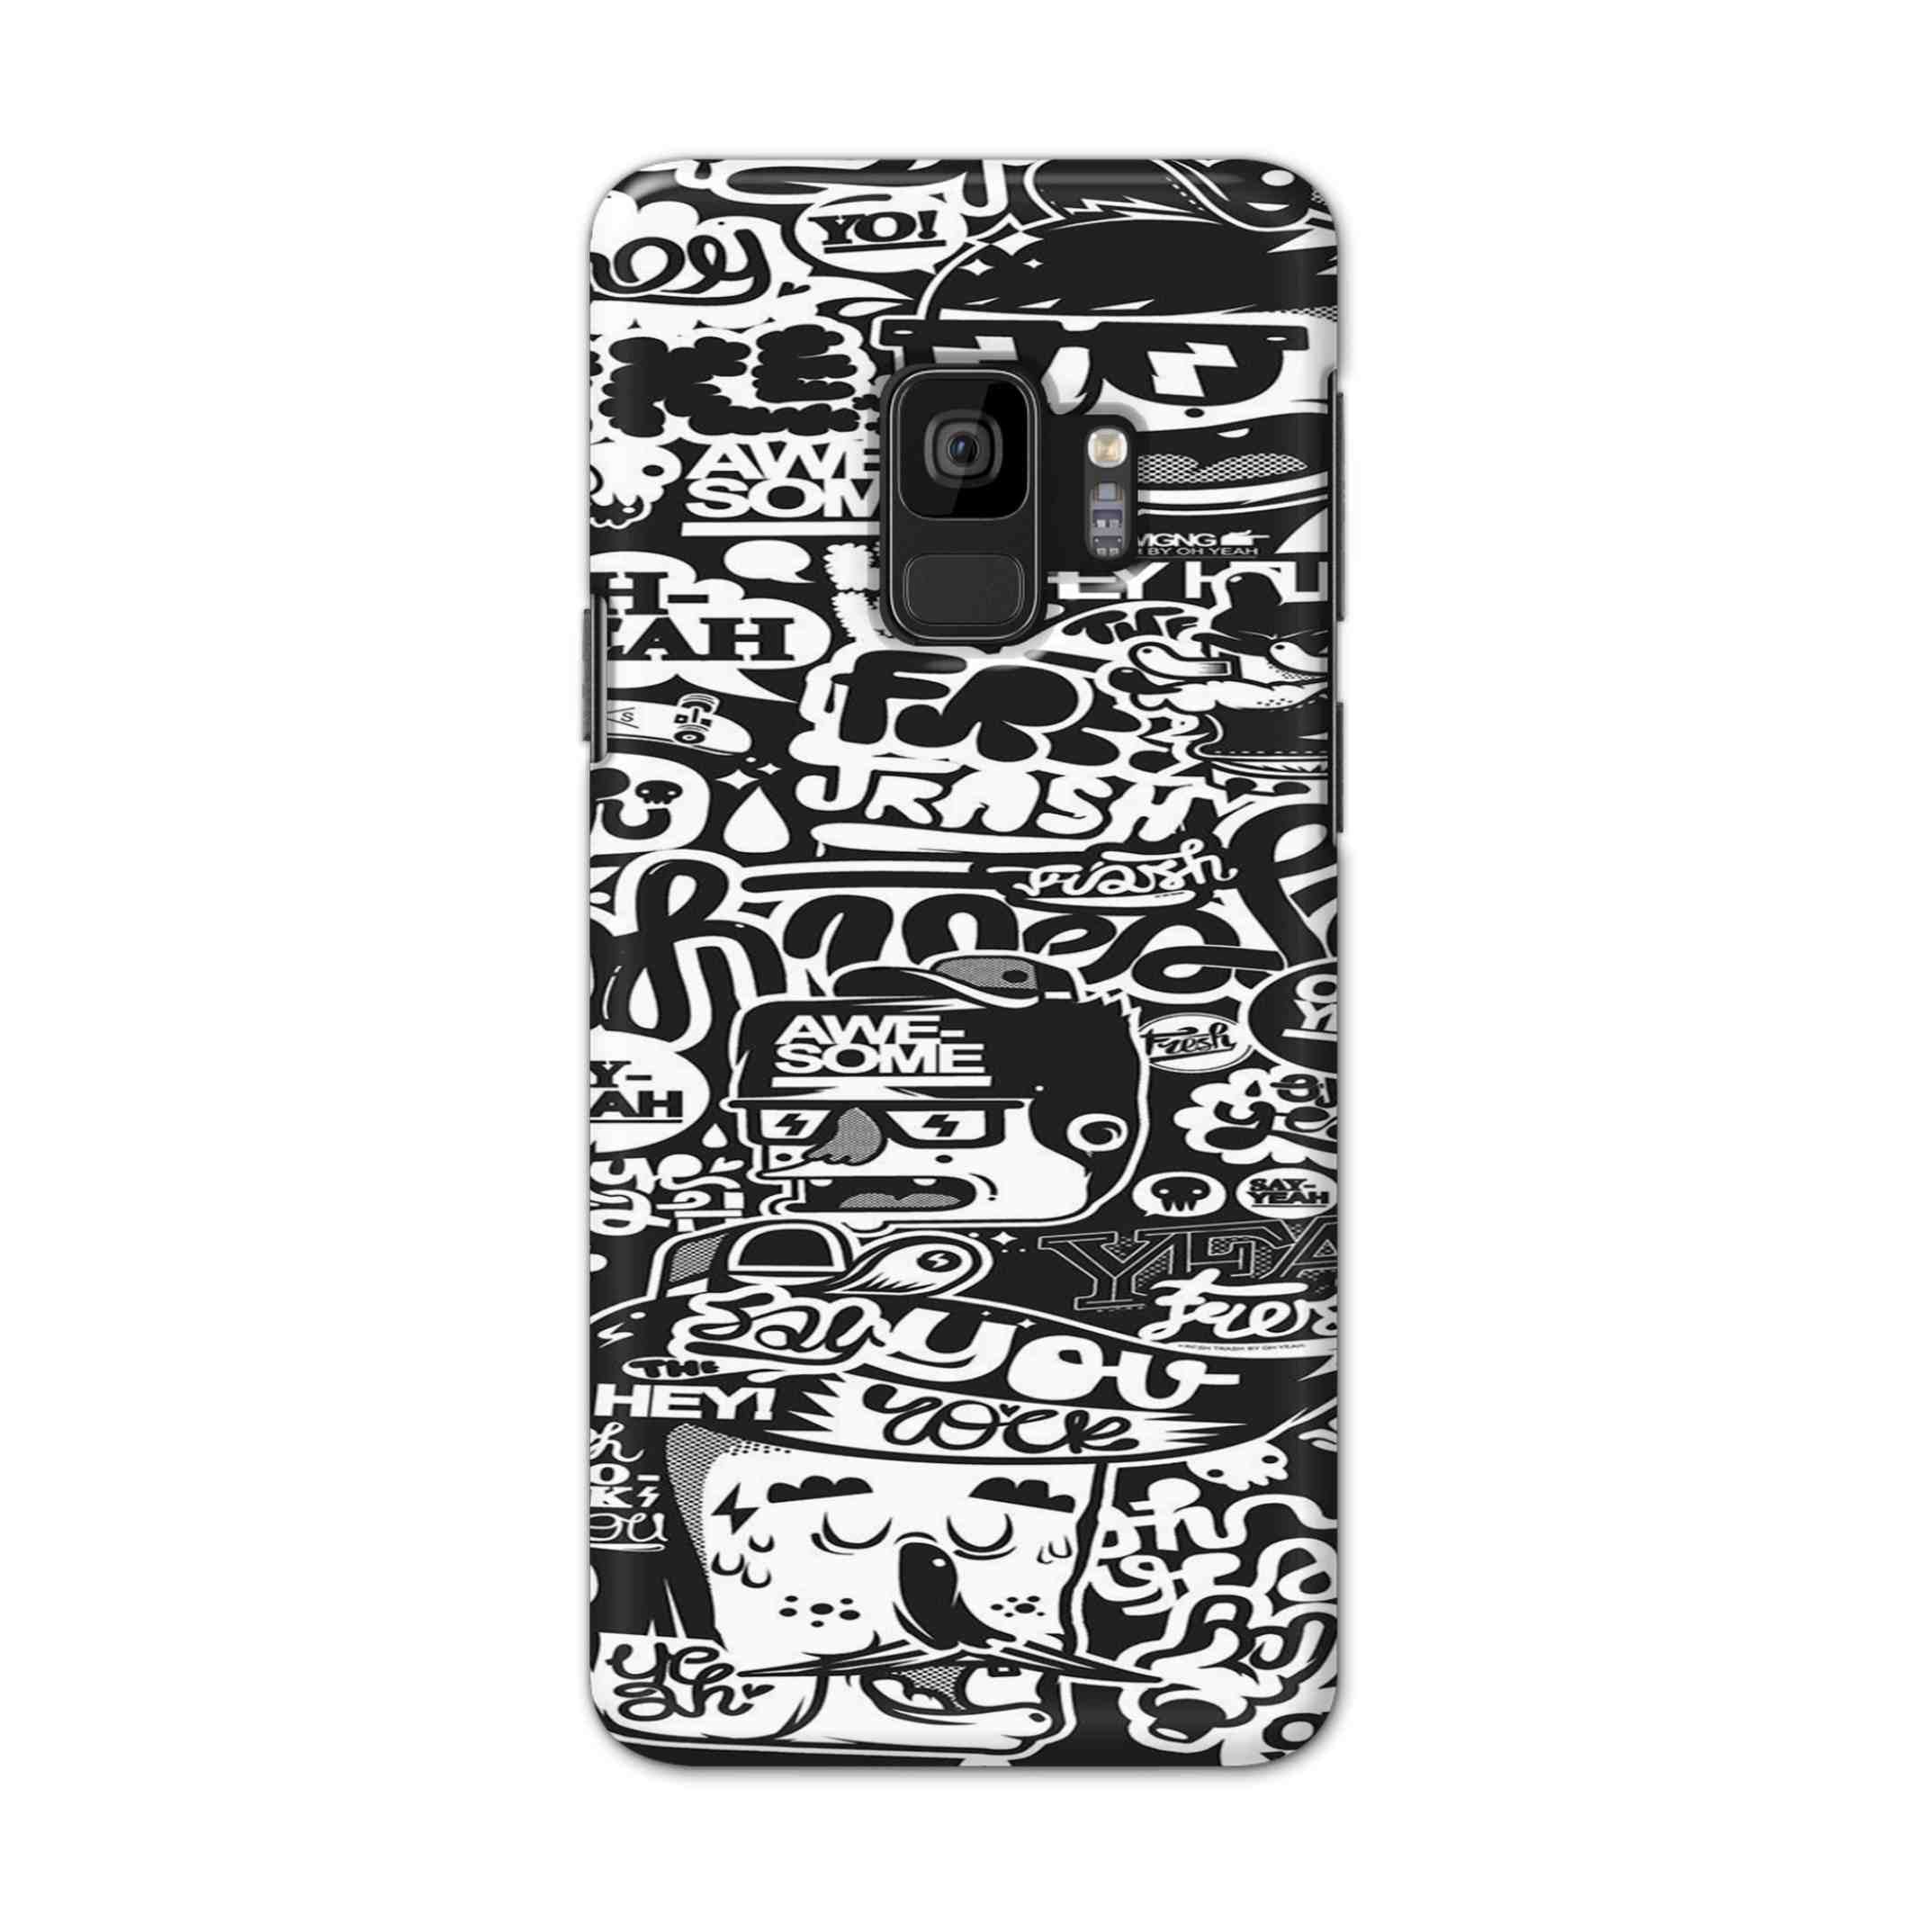 Buy Awesome Hard Back Mobile Phone Case Cover For Samsung S9 Online